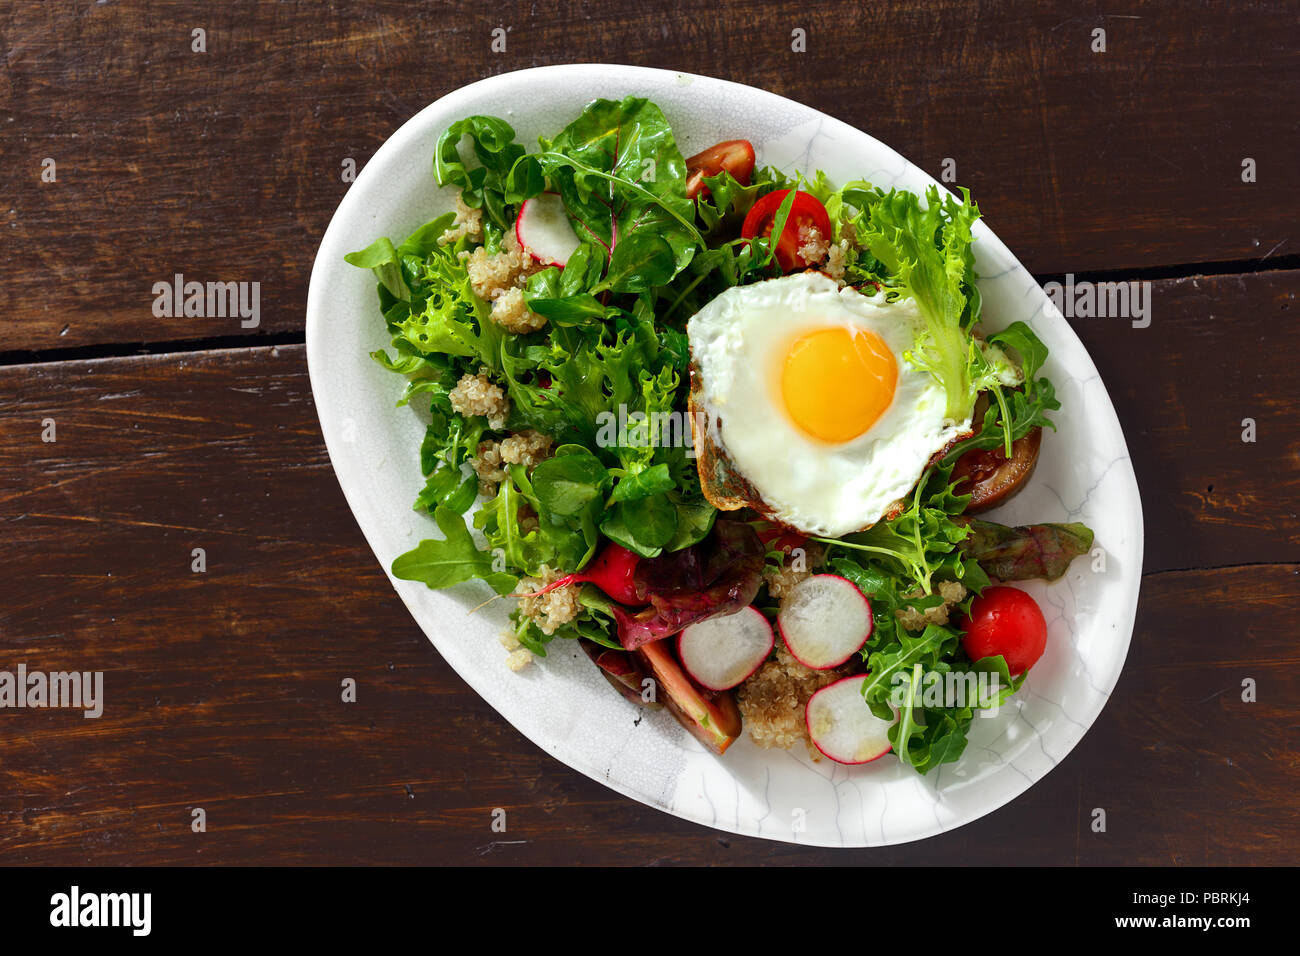 Plate fresh salad with quinoa and fried egg on wooden table. Healthy food clean eating Stock Photo